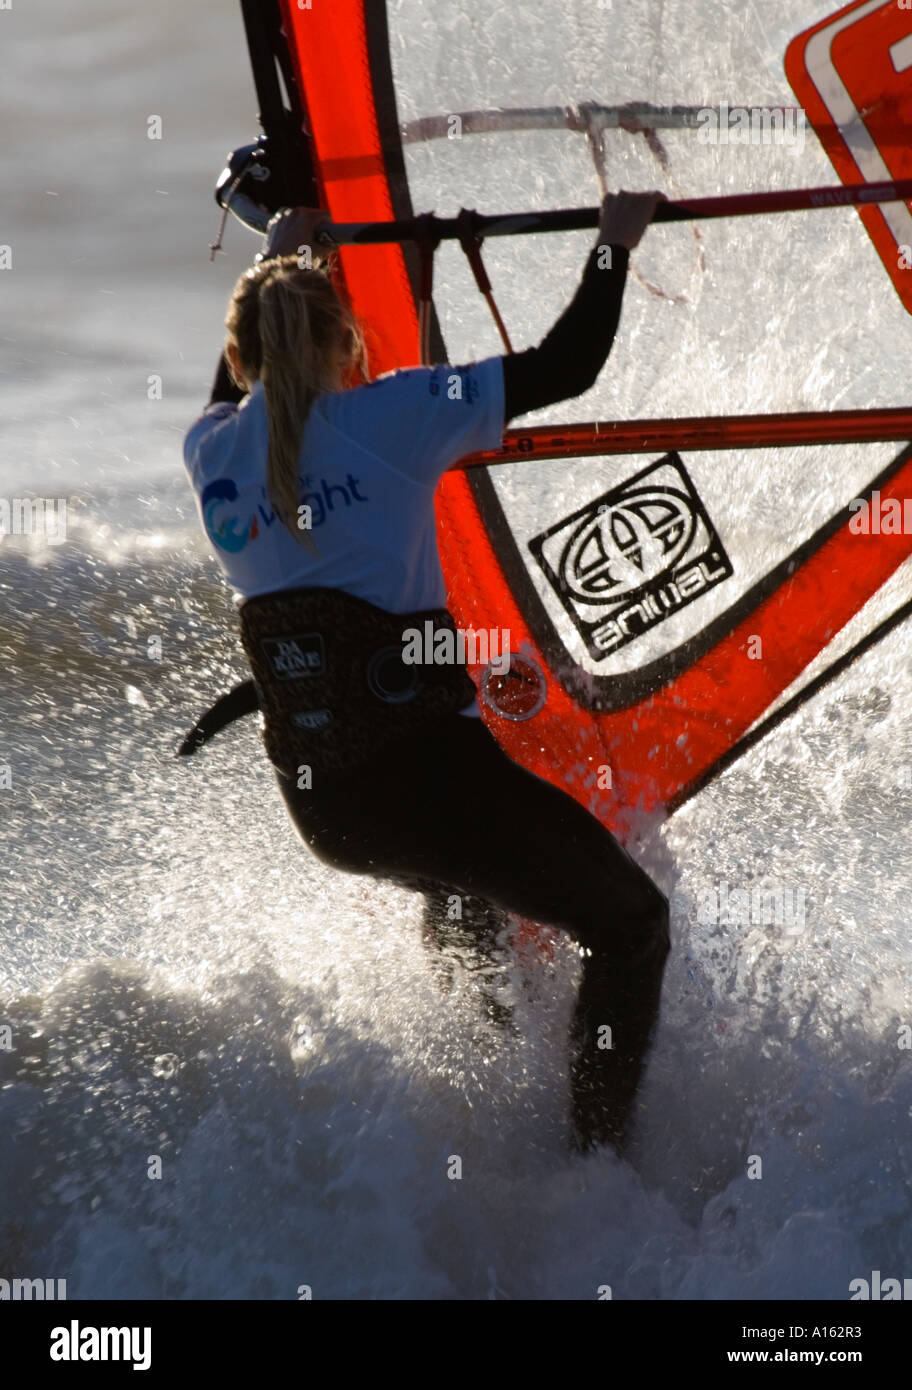 Oktober 2005-Windsurf-Wettbewerb in Compton White Air Extreme Sports Festival Isle Of Wight Stockfoto